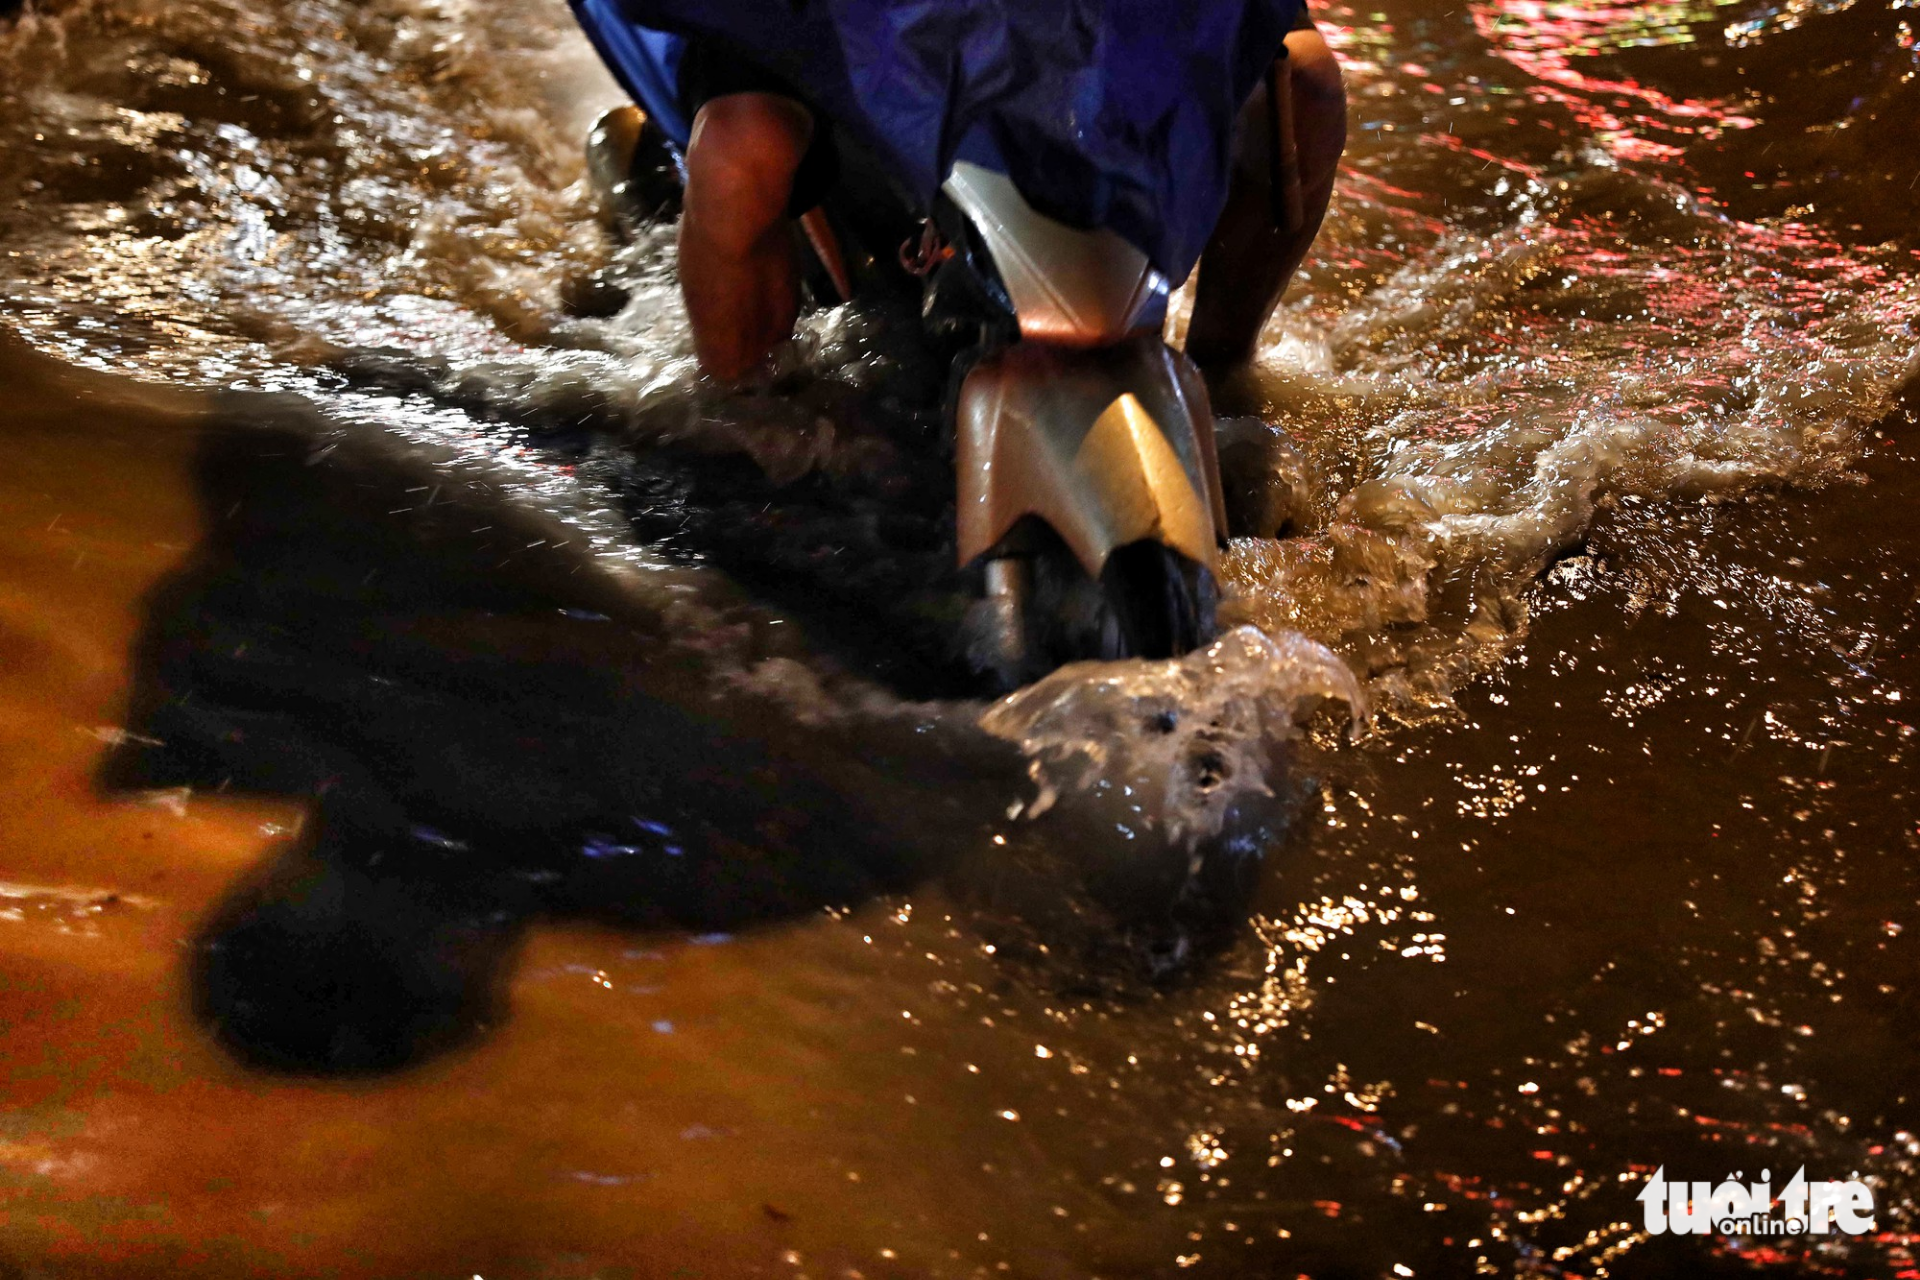 A motorcyclist struggles in floodwaters. Photo: Tuoi Tre